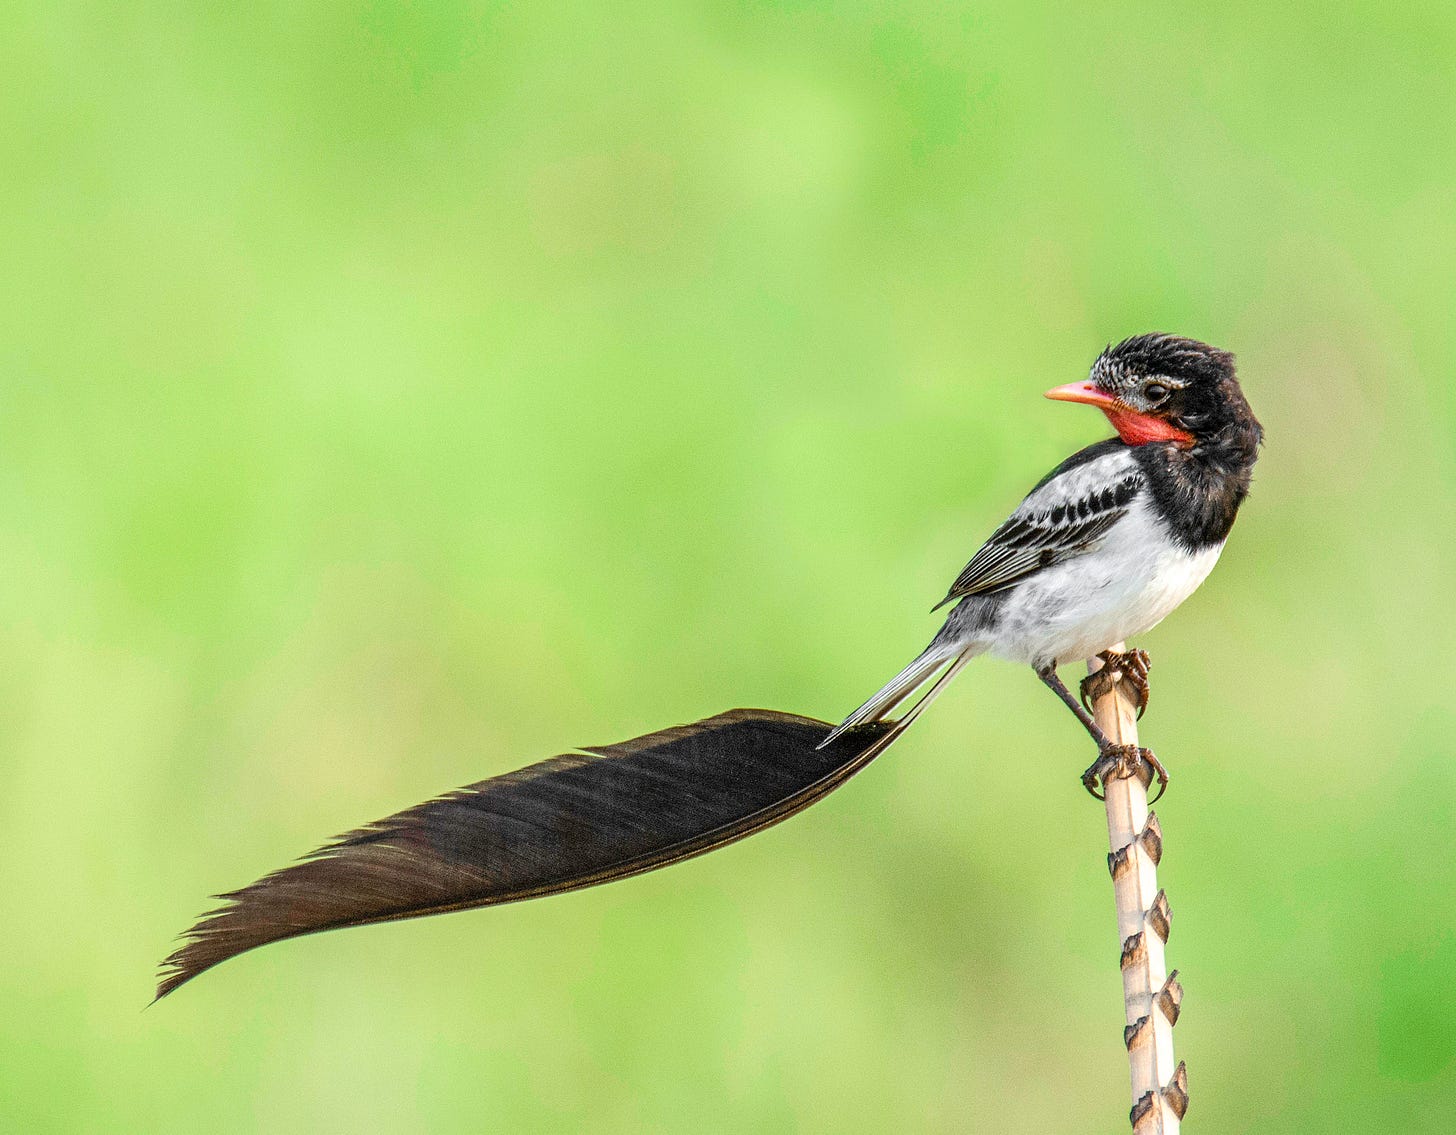 A small white bird with black wings and collar and a long single-feather tail perches on a stick against a blurred green background